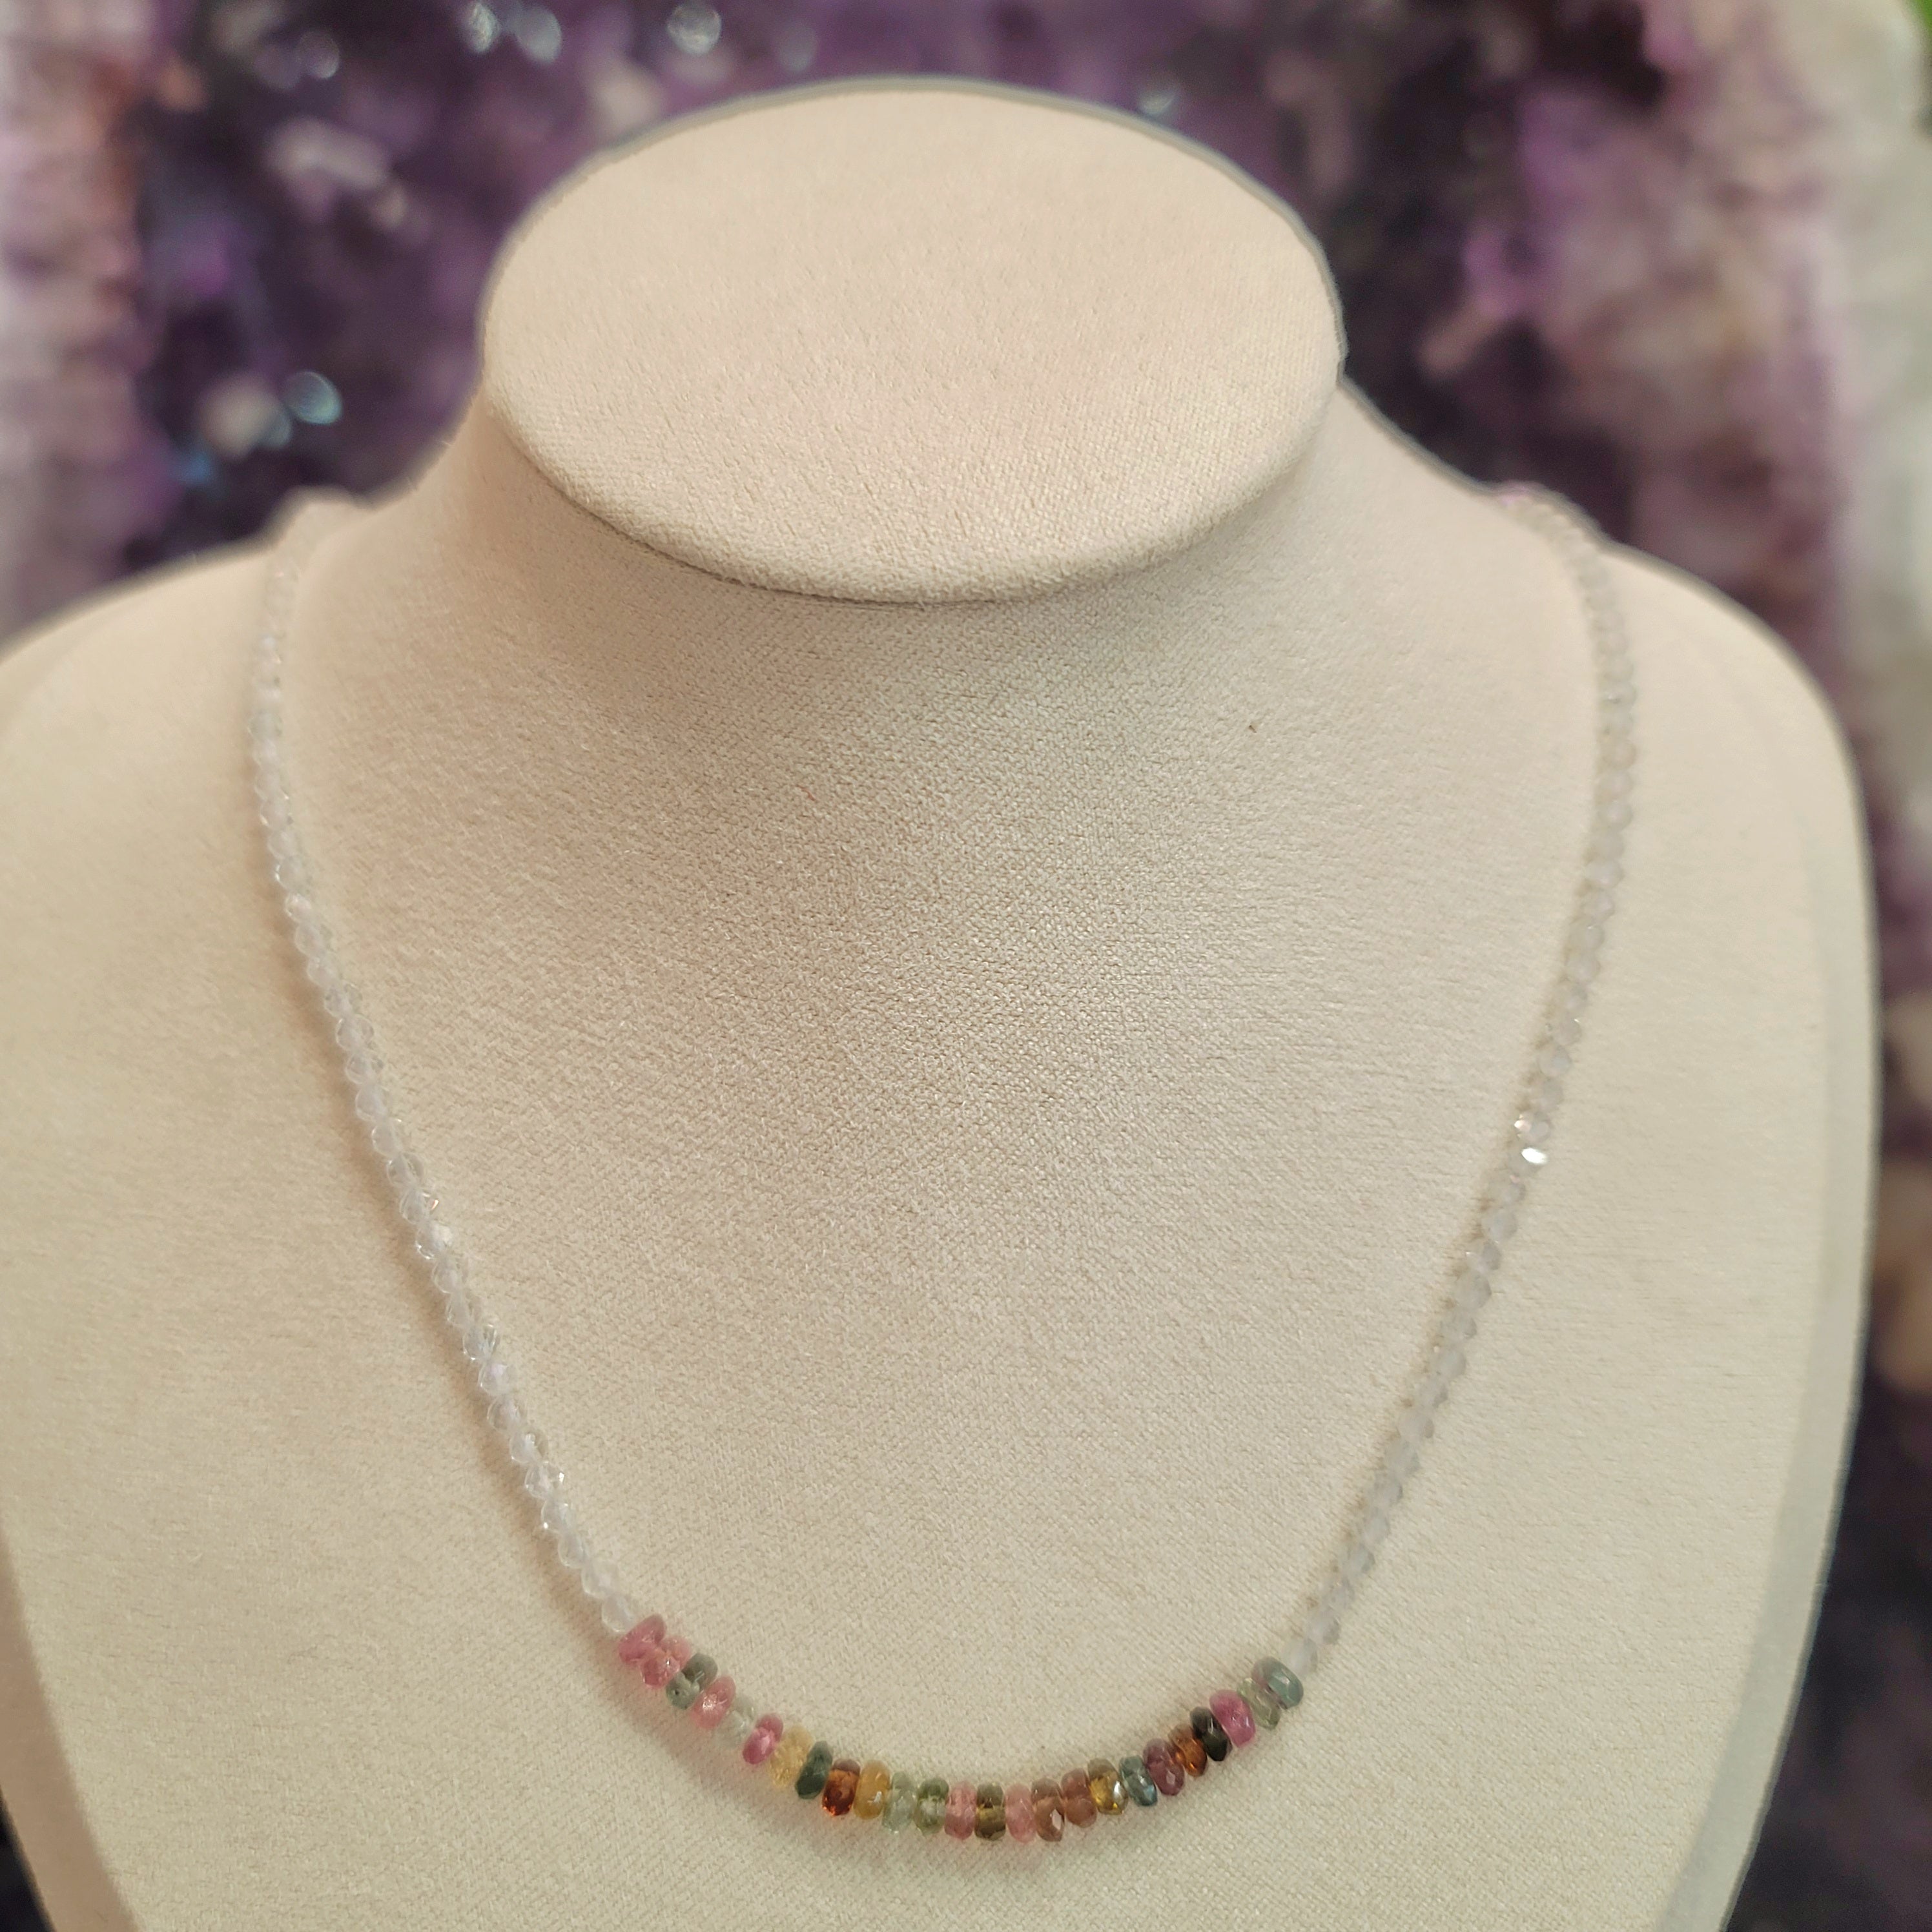 Tourmaline & White Topaz Micro Necklace for Embracing Desires of your Heart